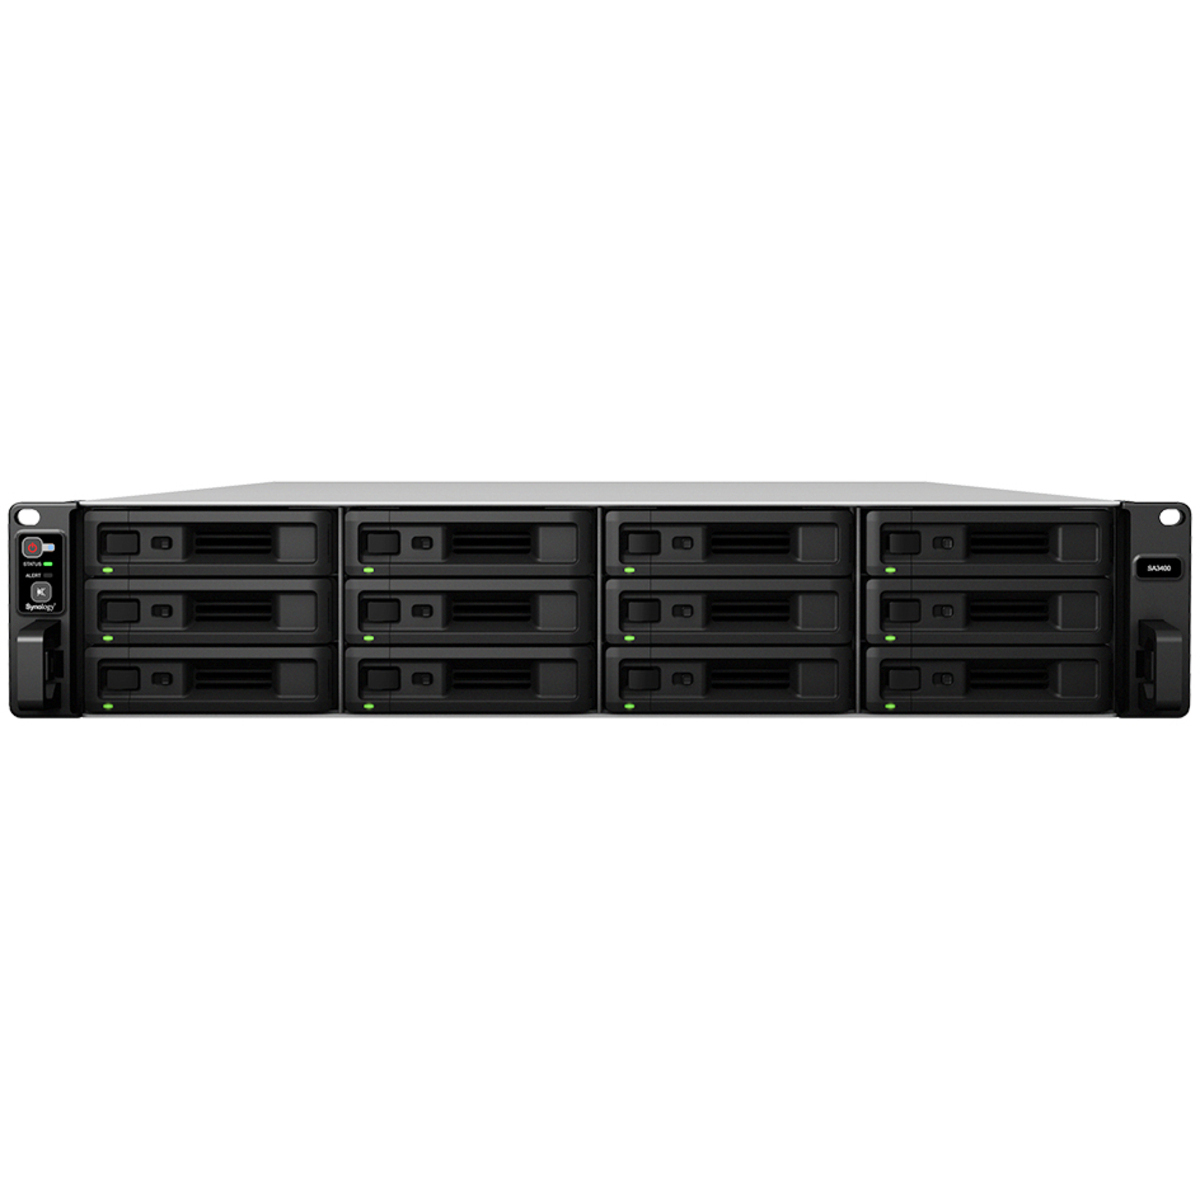 buy $8226 Synology RackStation SA3400 24tb RackMount NAS - Network Attached Storage Device 12x2000gb Seagate BarraCuda ST2000DM008 3.5 7200rpm SATA 6Gb/s HDD CONSUMER Class Drives Installed - Burn-In Tested - ON SALE - nas headquarters buy network attached storage server device das new raid-5 free shipping usa christmas new year holiday sale RackStation SA3400